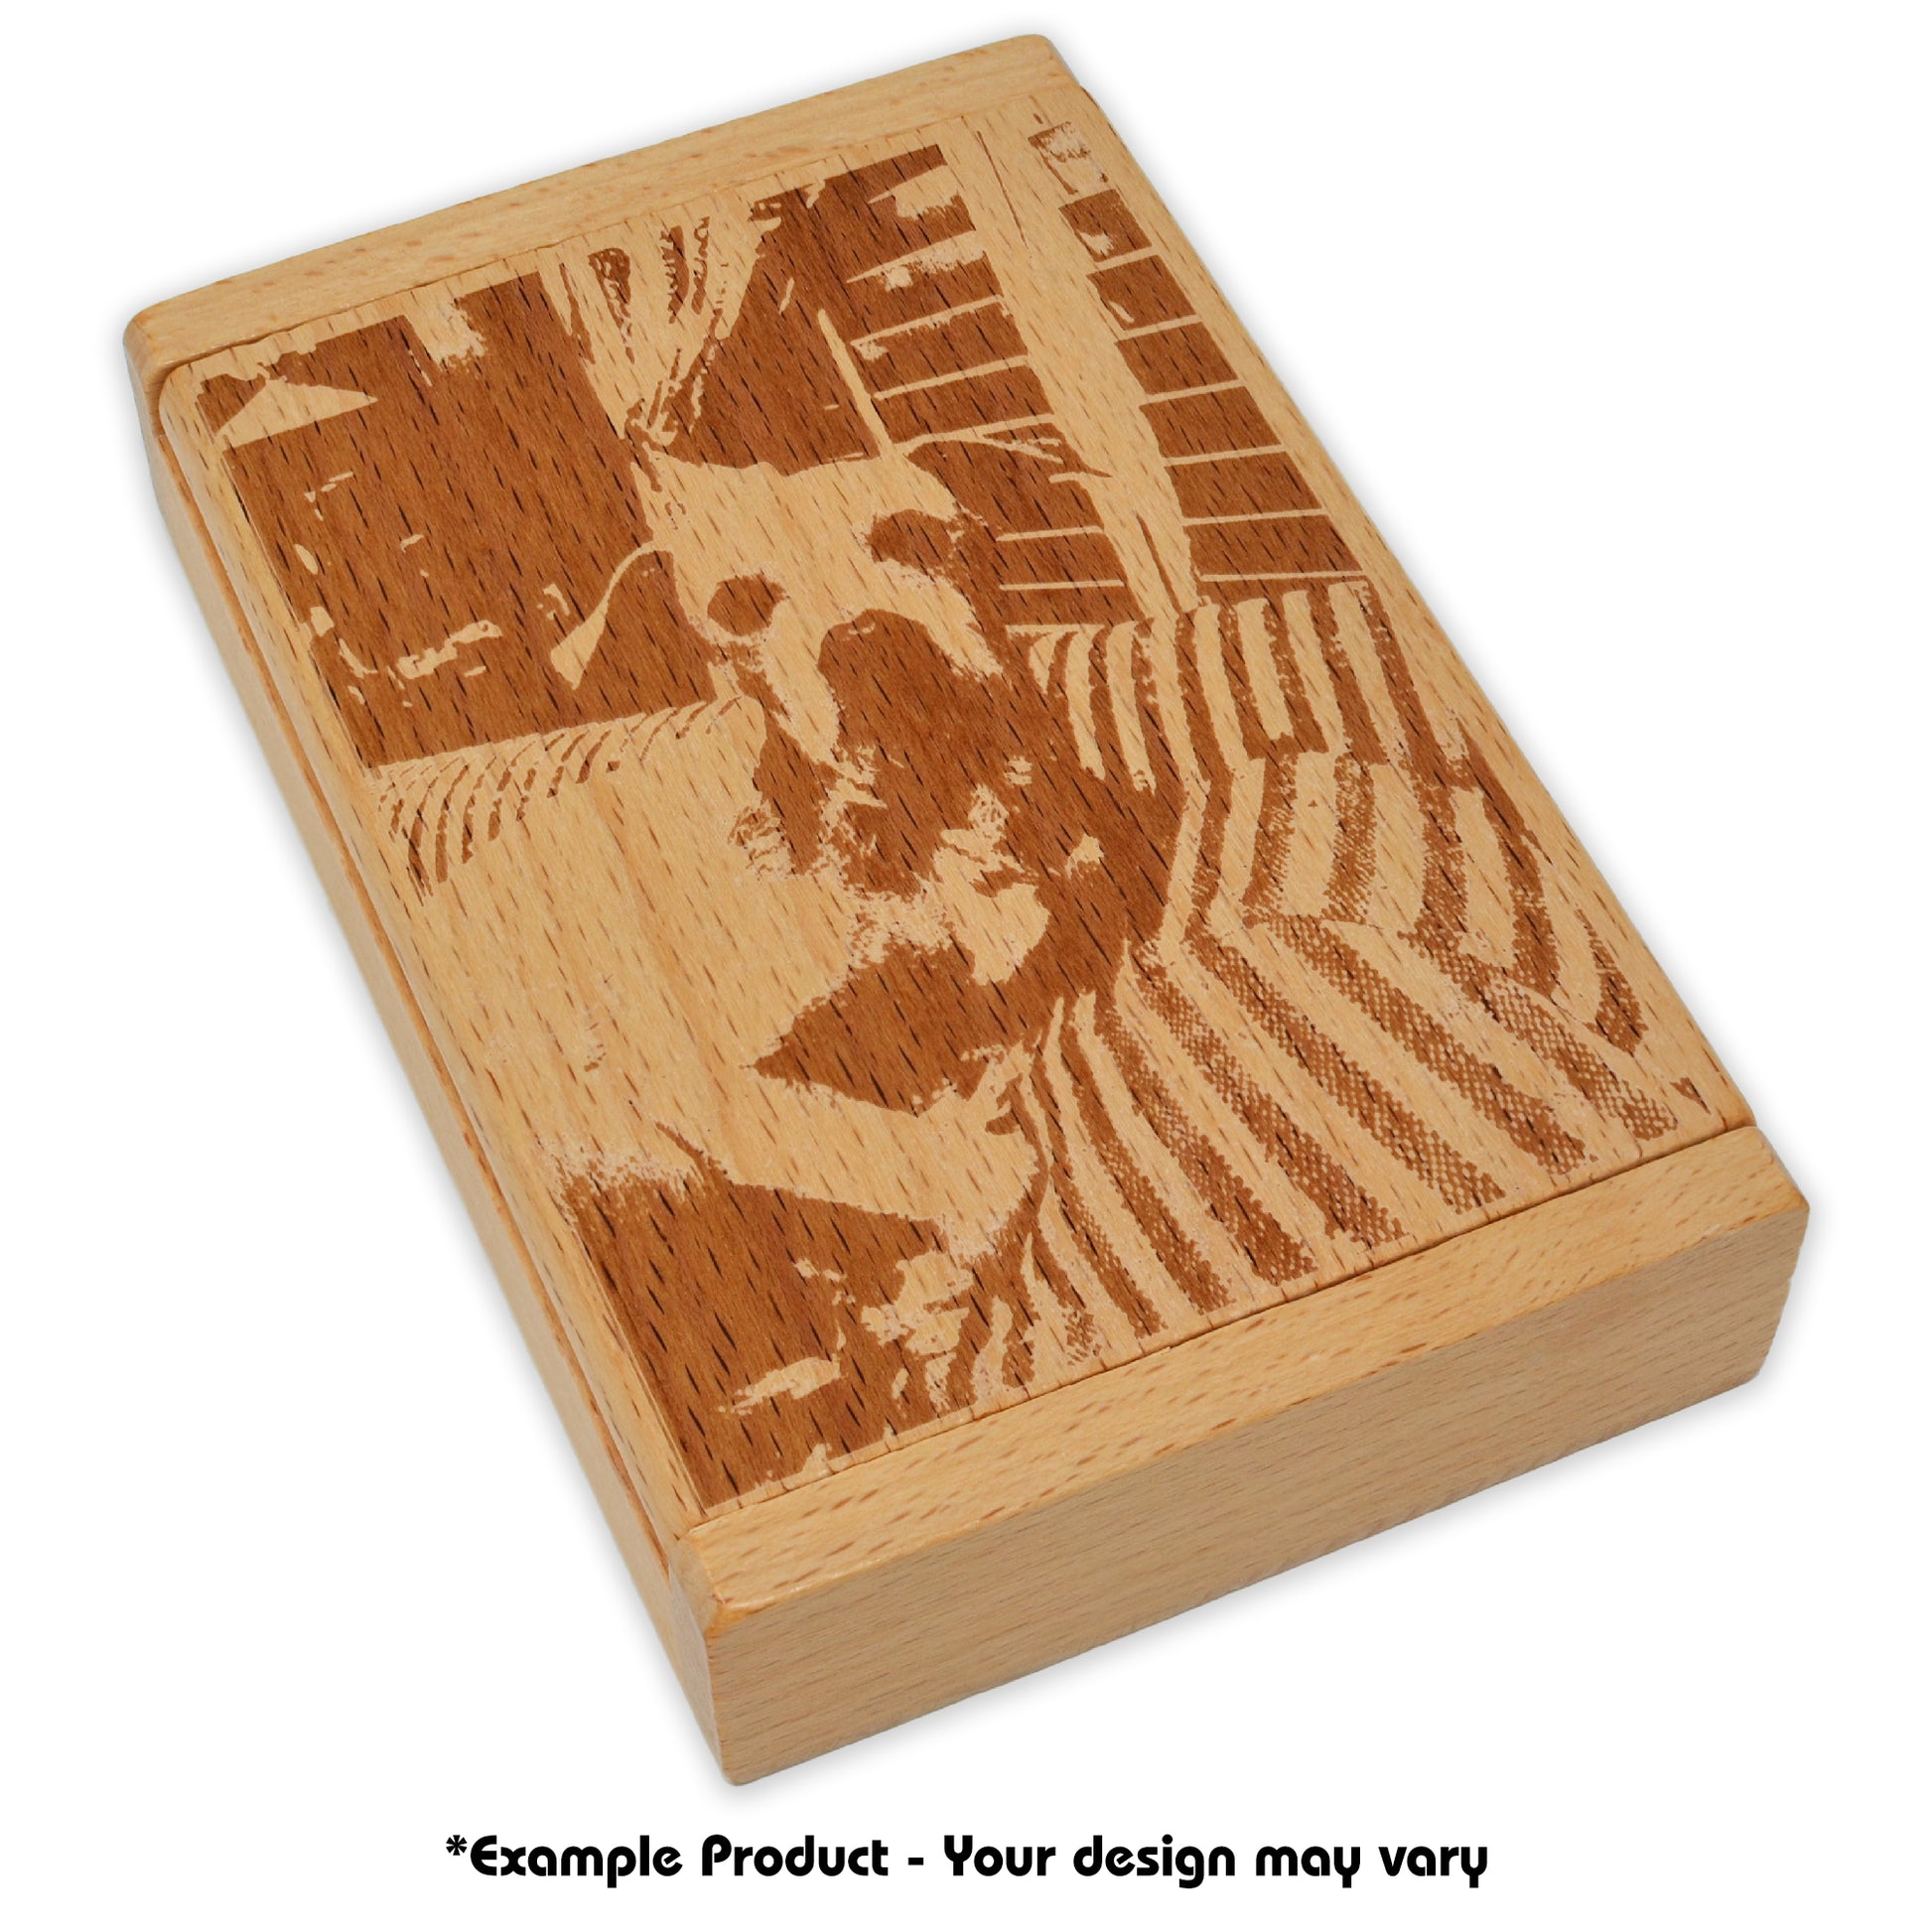 Angled overhead view of a Shut The Box wooden dice game engraved with a custom photo design of a dog on a sofa